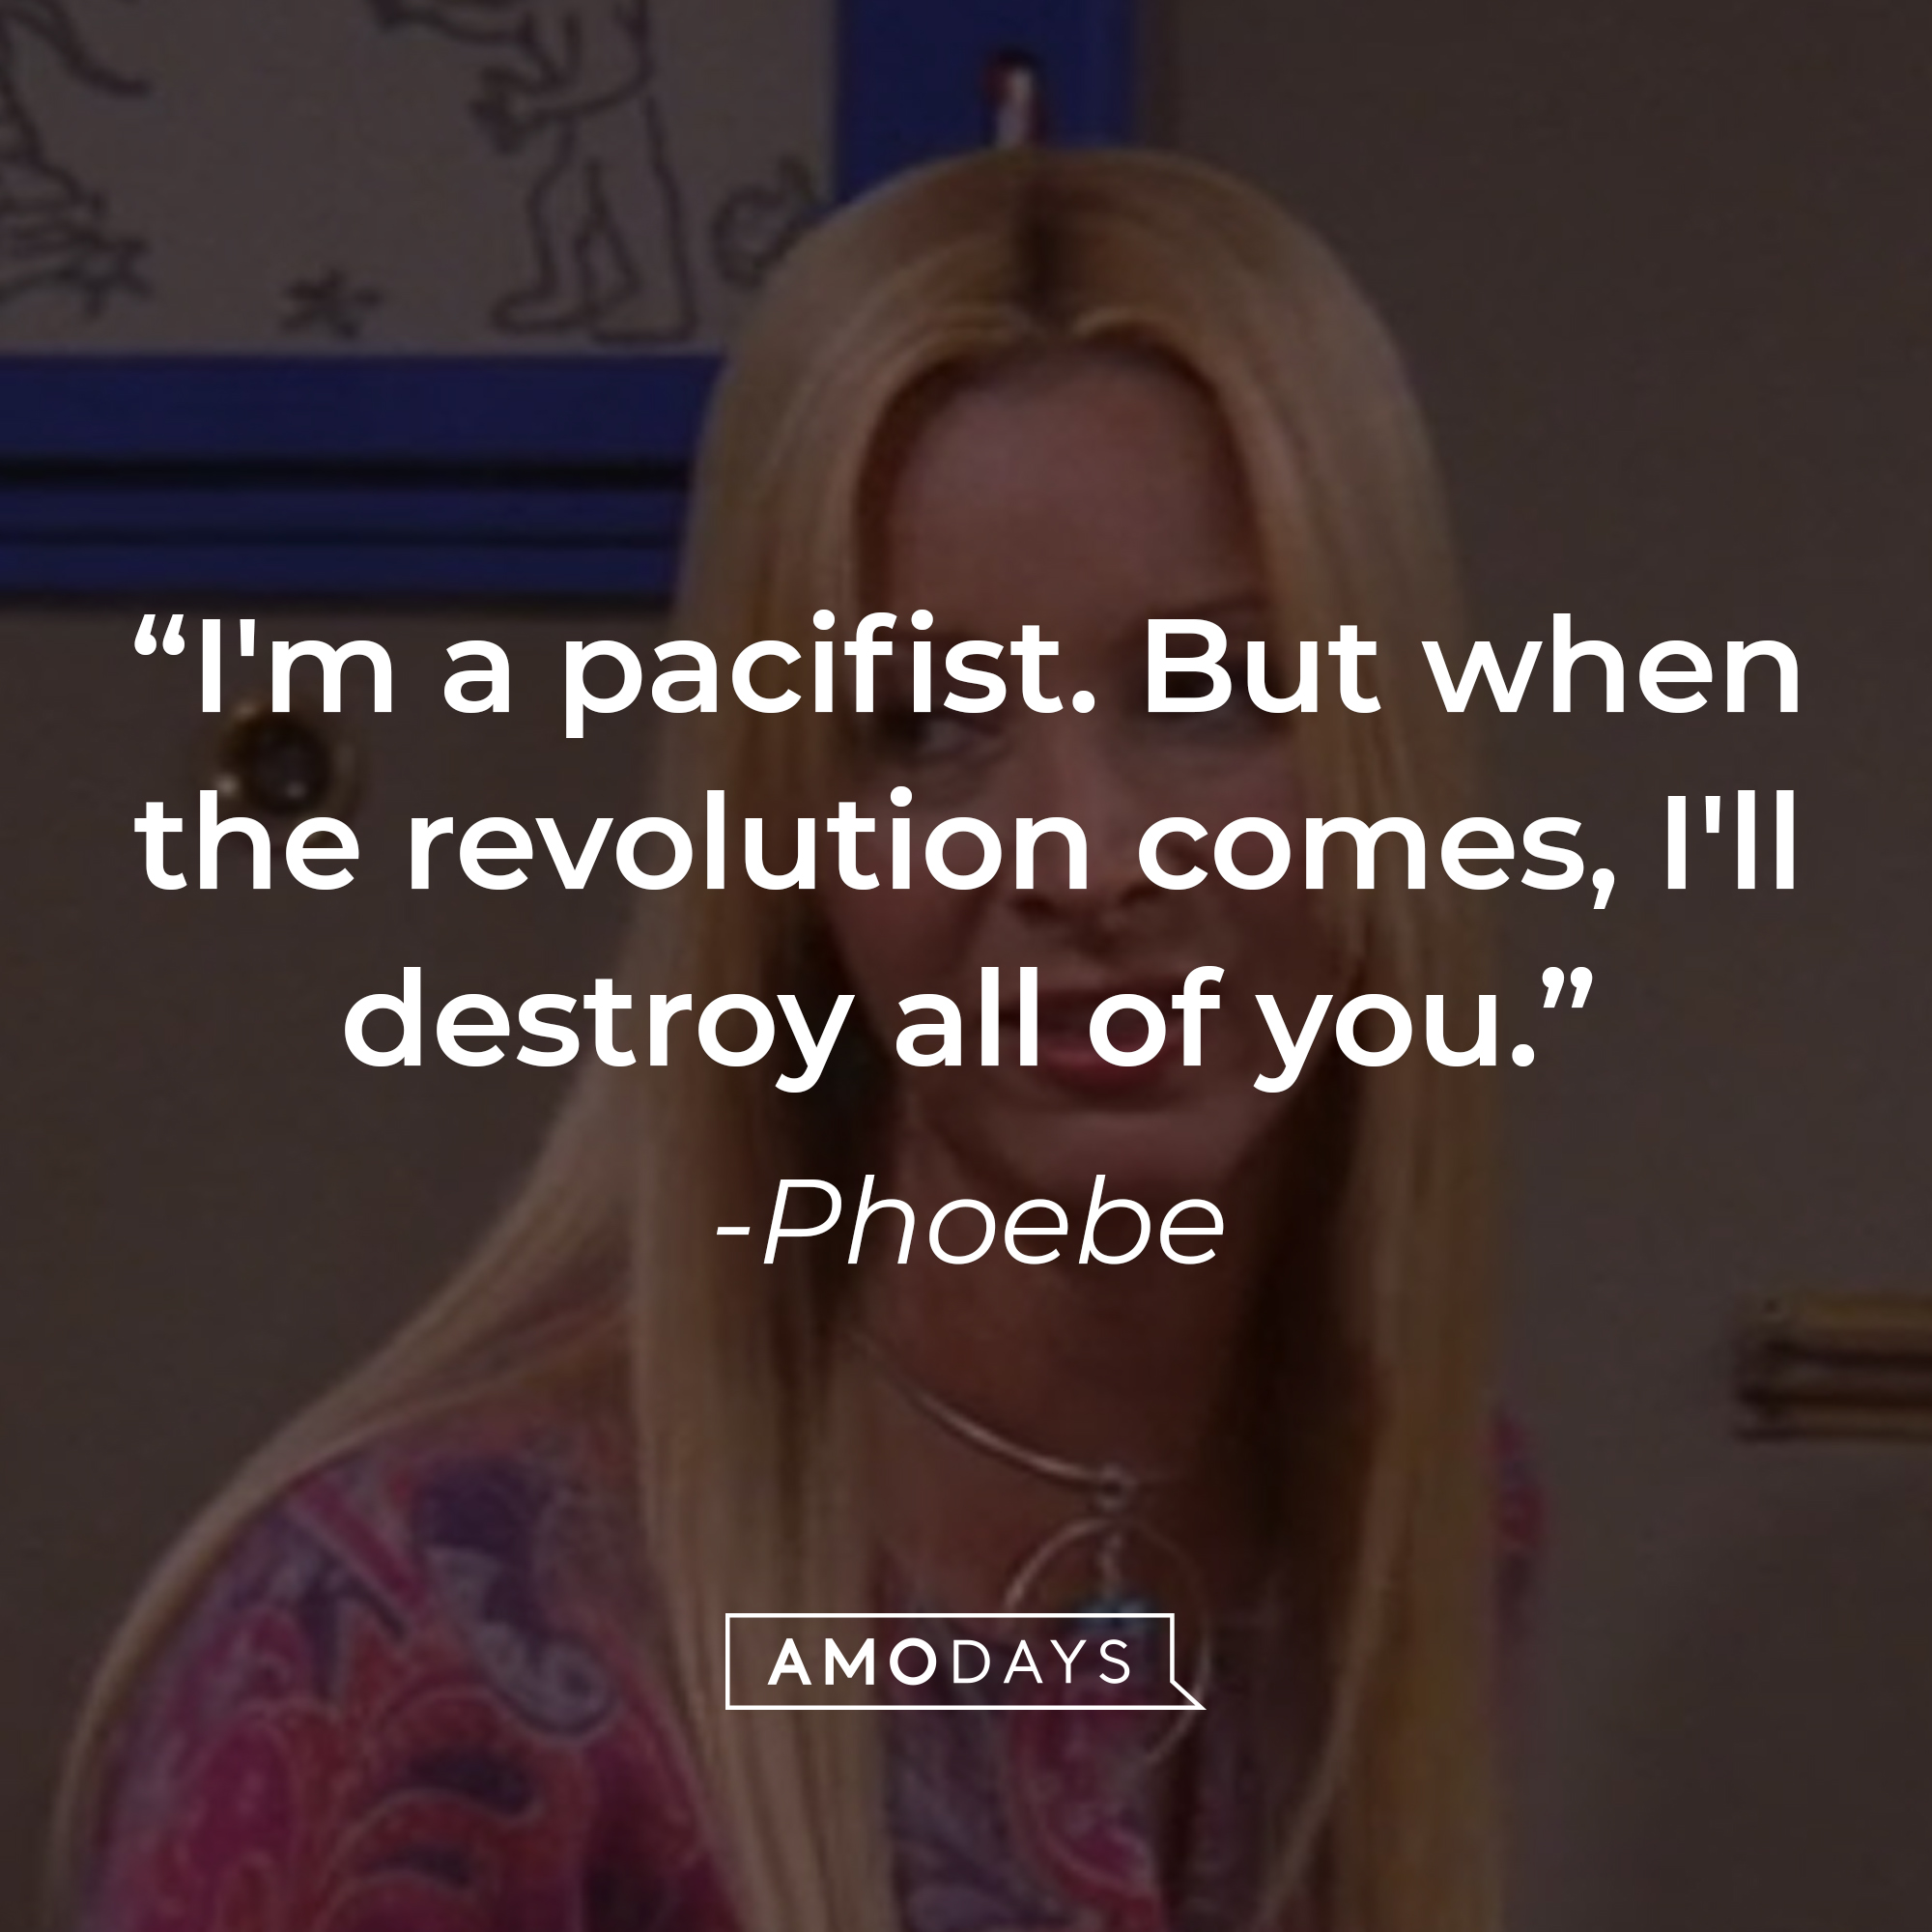 Phoebe's quote: "I'm a pacifist. But when the revolution comes, I'll destroy all of you." | Source: Facebook.com/friends.tv